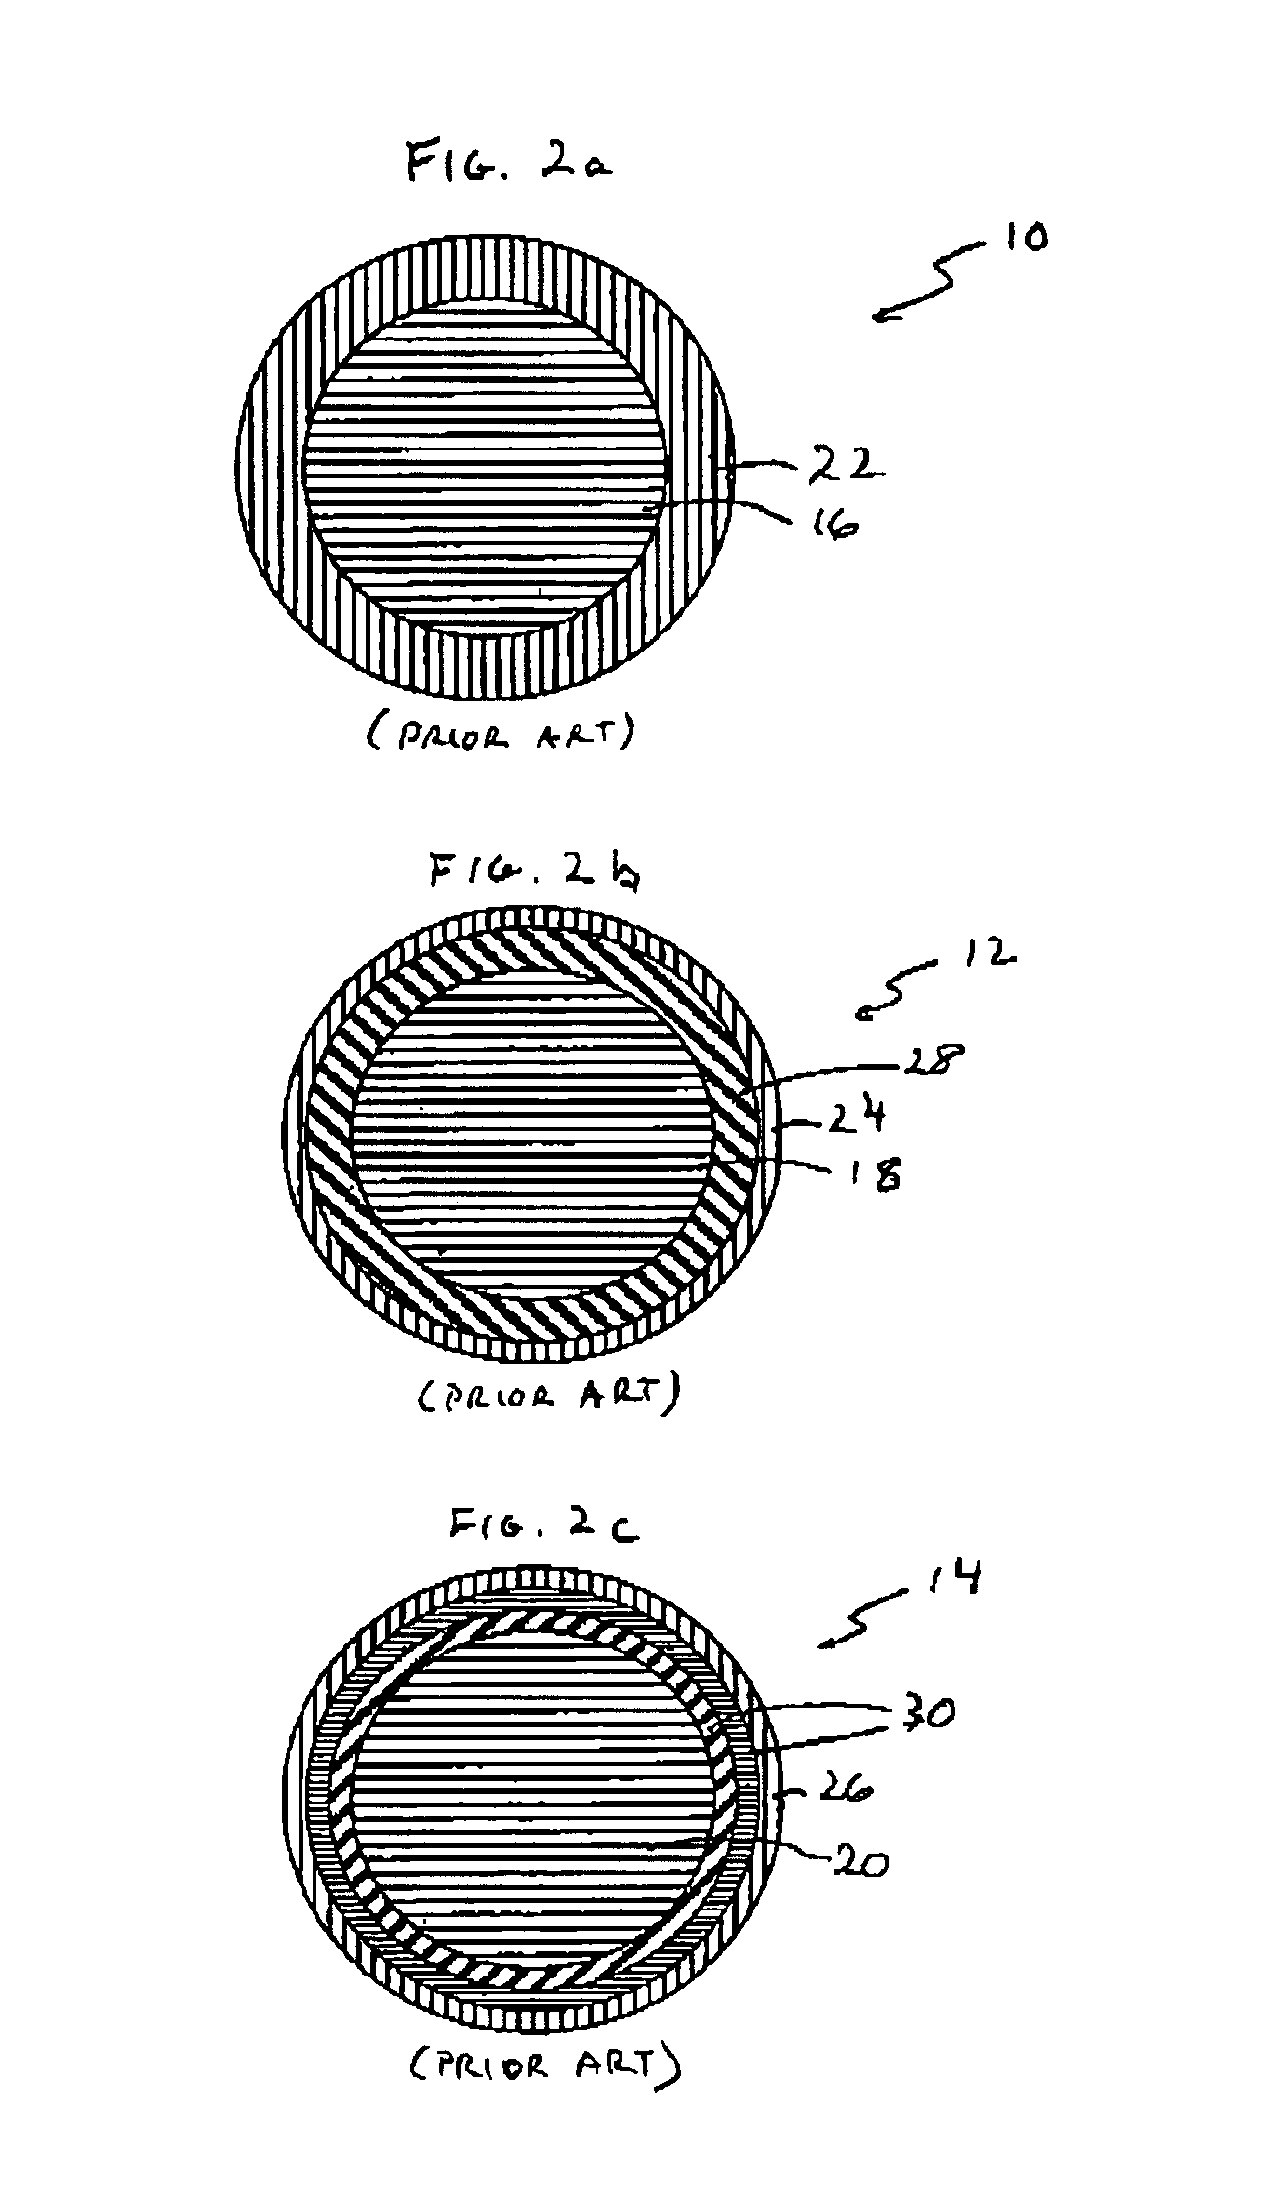 Golf balls, golf ball compositions, and methods of manufacture